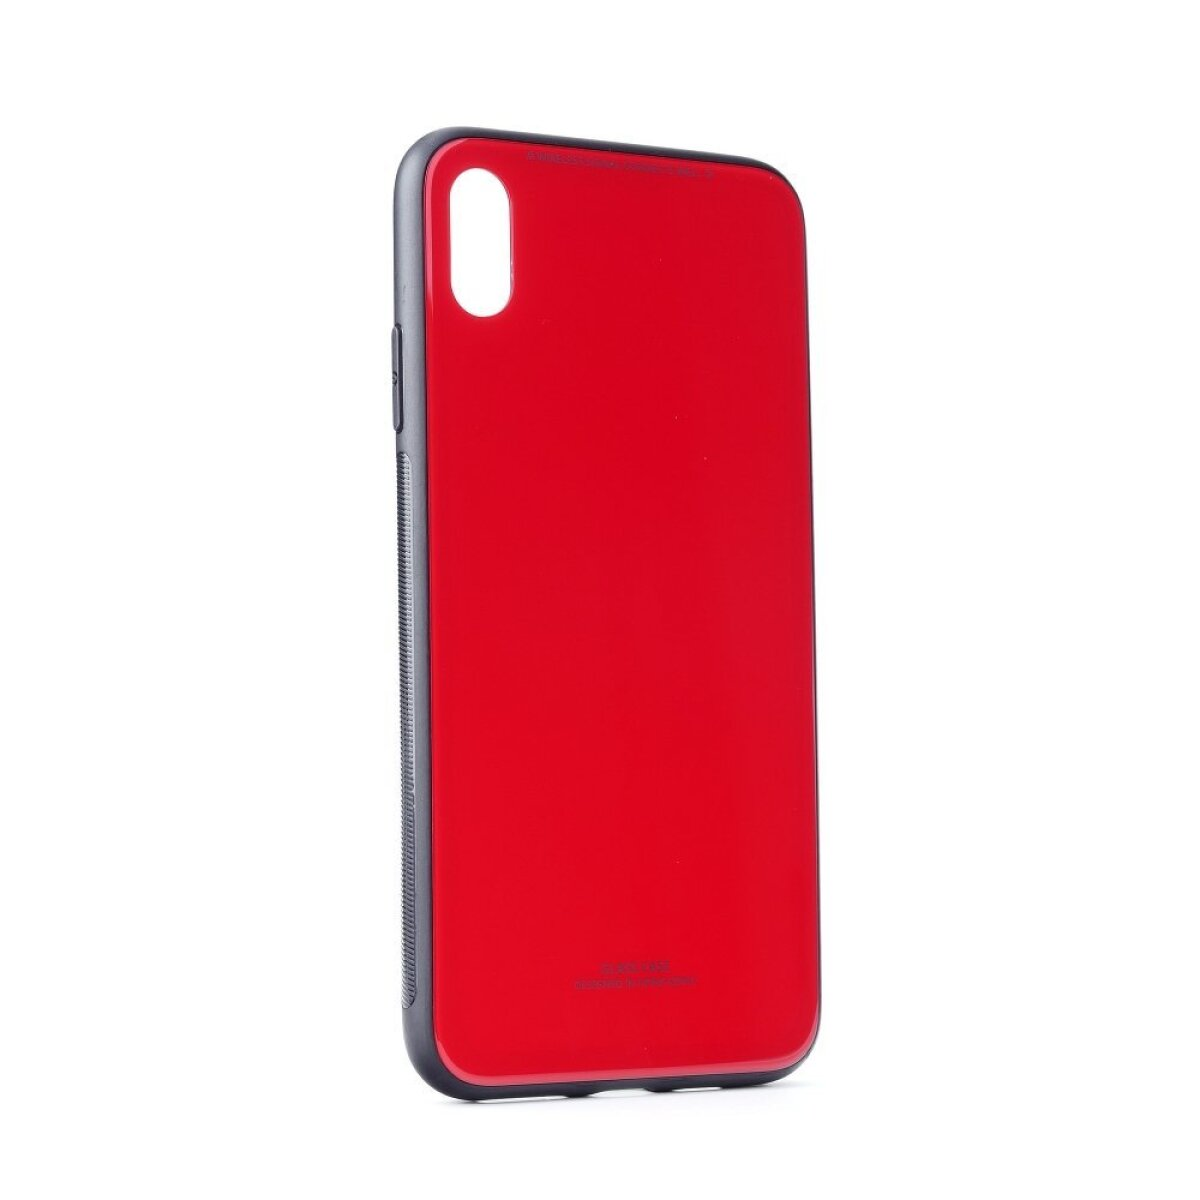 Max Bookcover, Pro Max, GLASS iPhone iPhone CASE 11 11 Schwarz; Rot Pro FORCELL schwarz/rot, Apple,